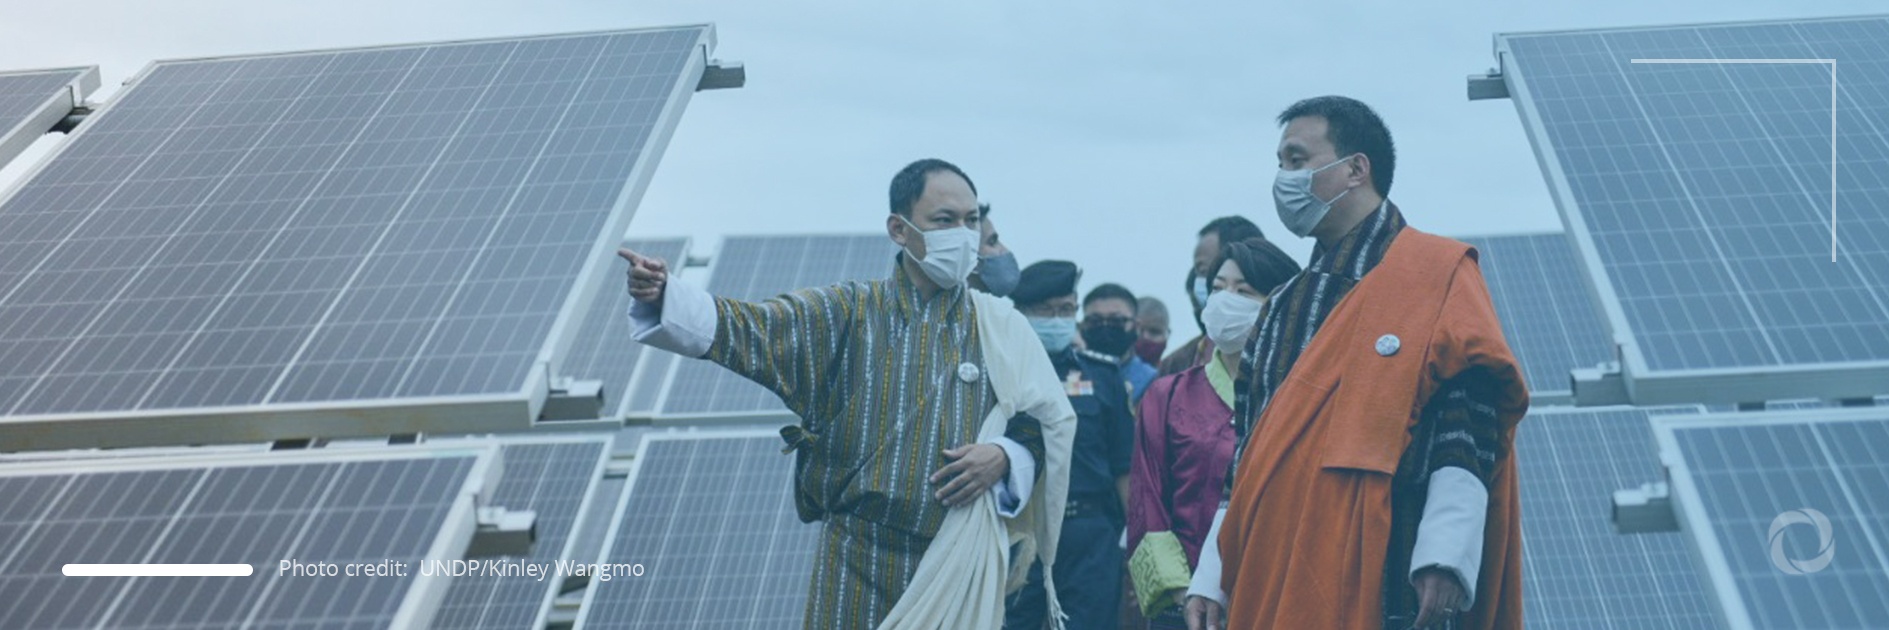 Bhutan launches first grid-tied solar power plant to achieve energy security